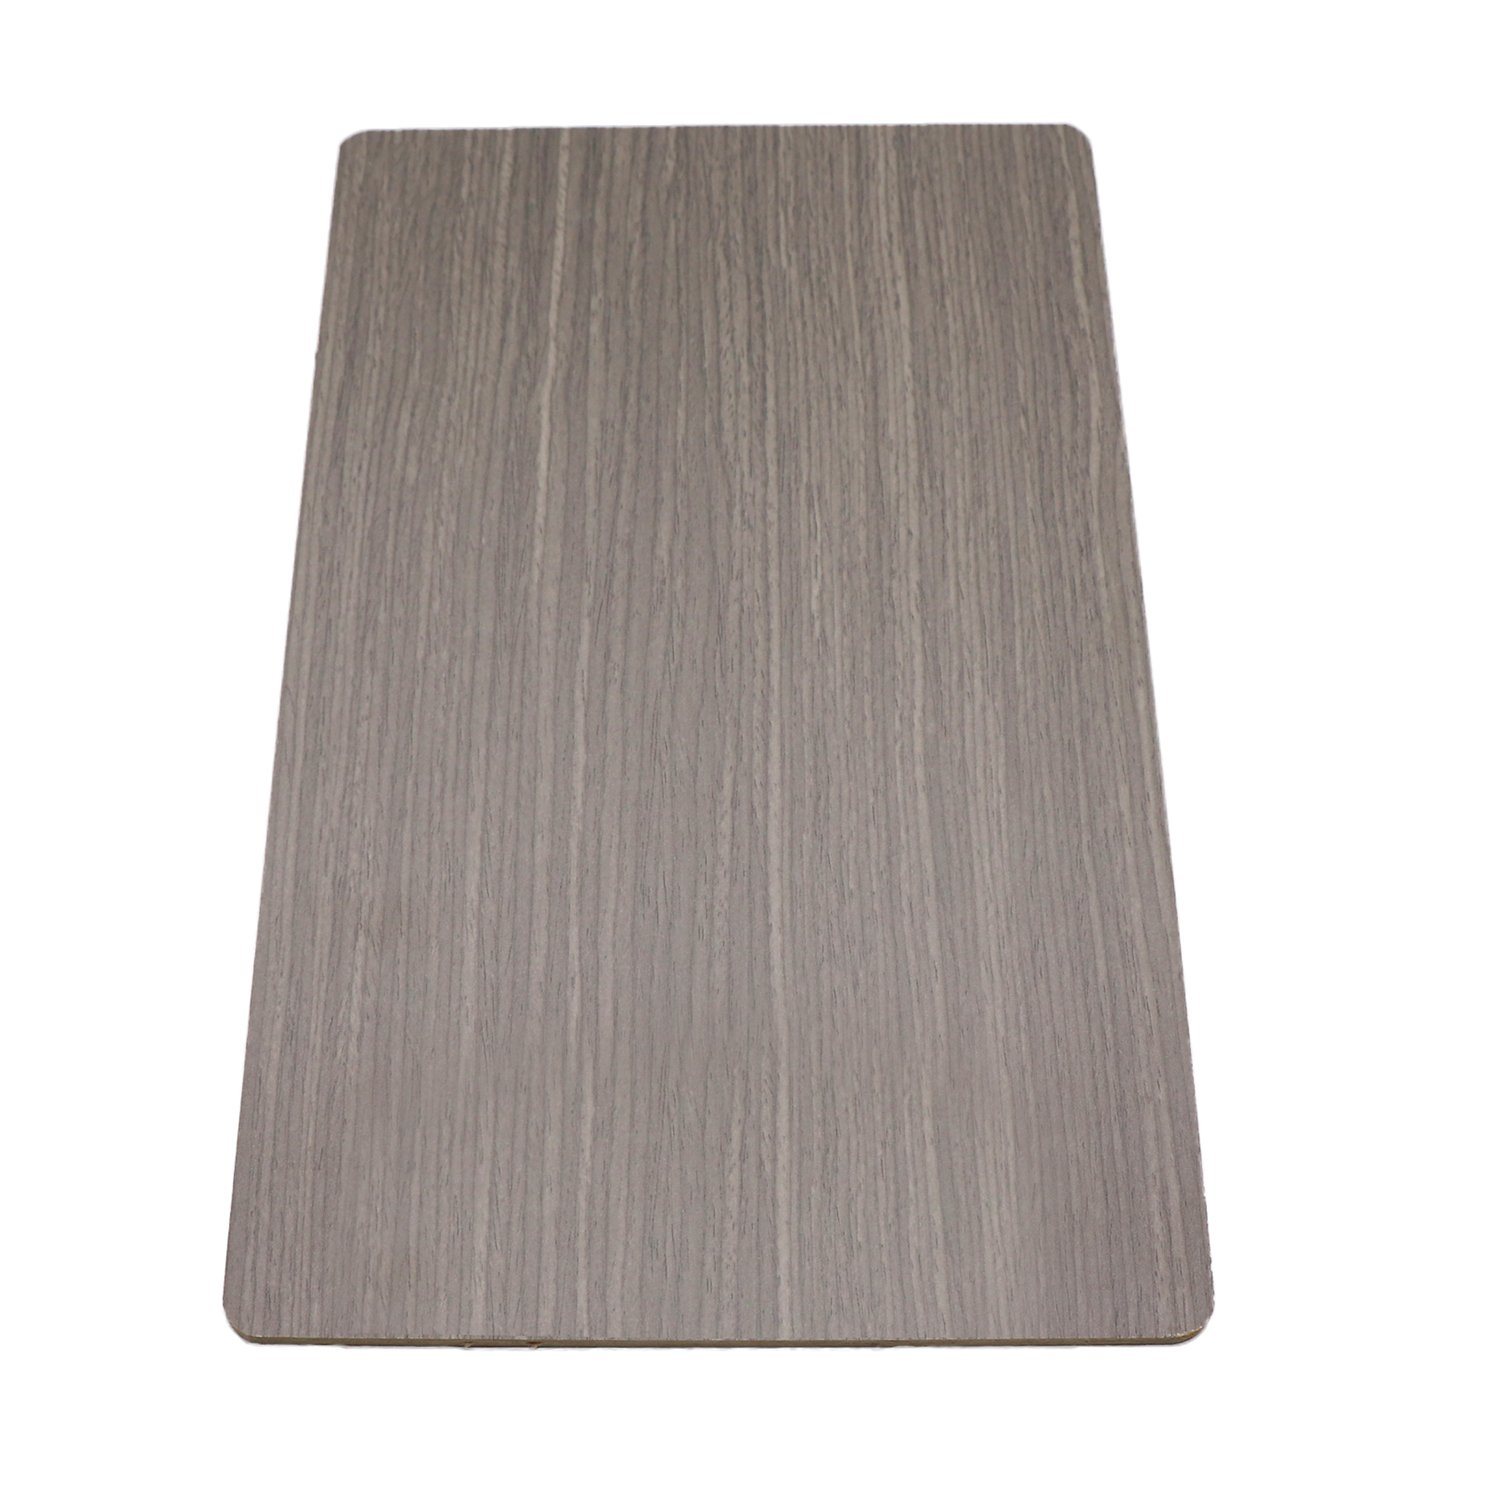 Different Design Melamine Plywood Multi Woodgrain Paper Film Faced Plywood Board for Furniture